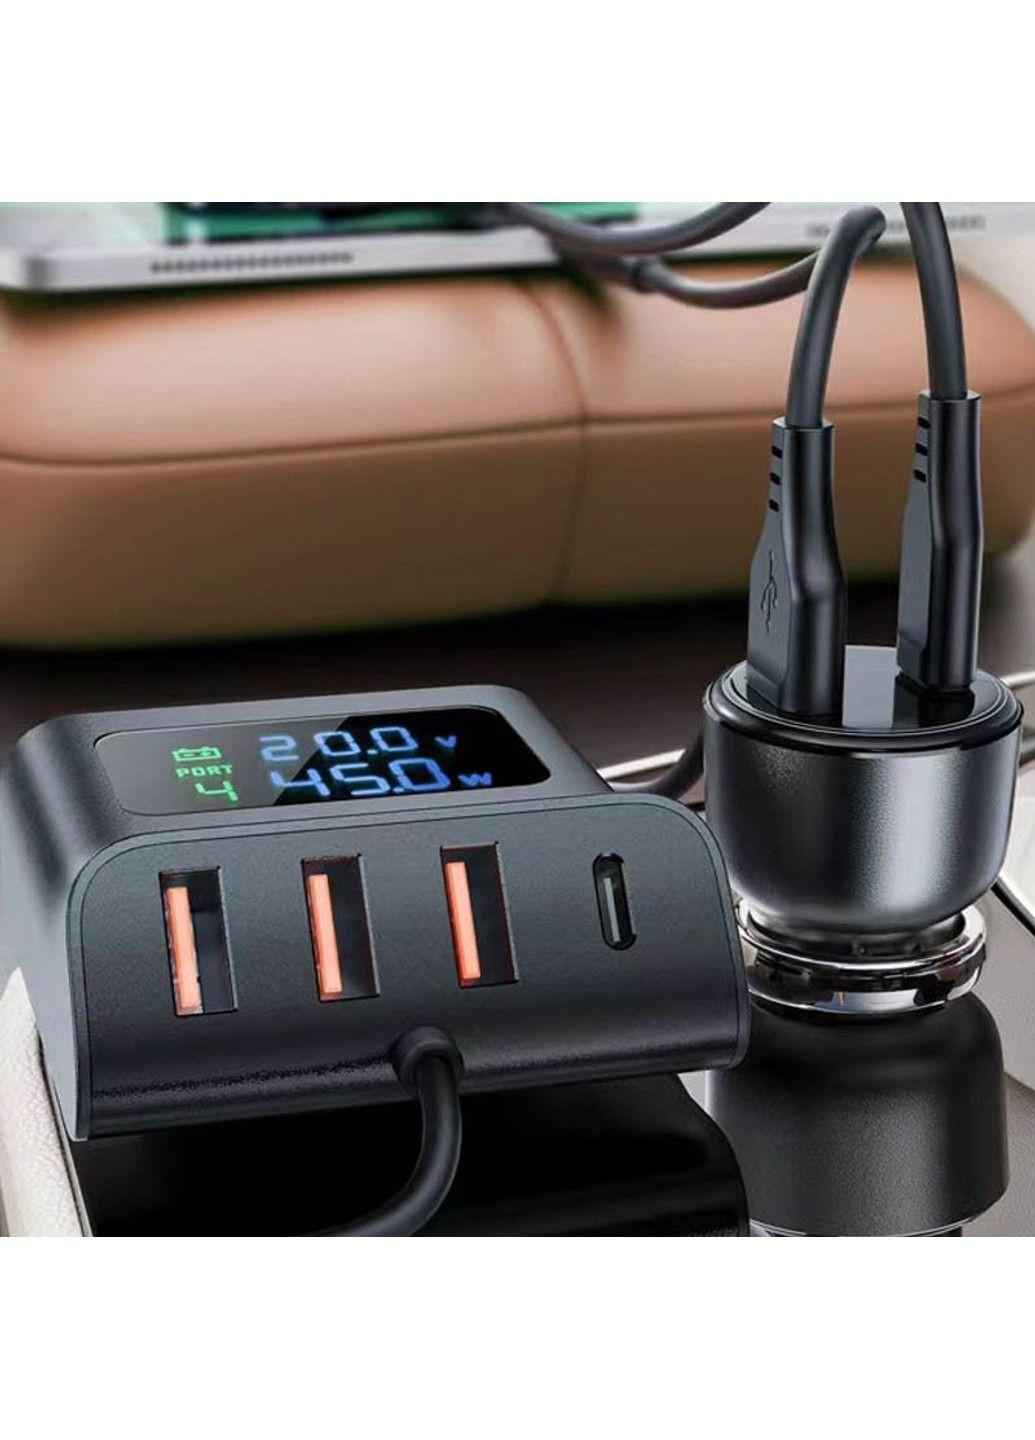 АЗУ B11 138W Car Charger Splitter with Digital Display Acefast (291881618)